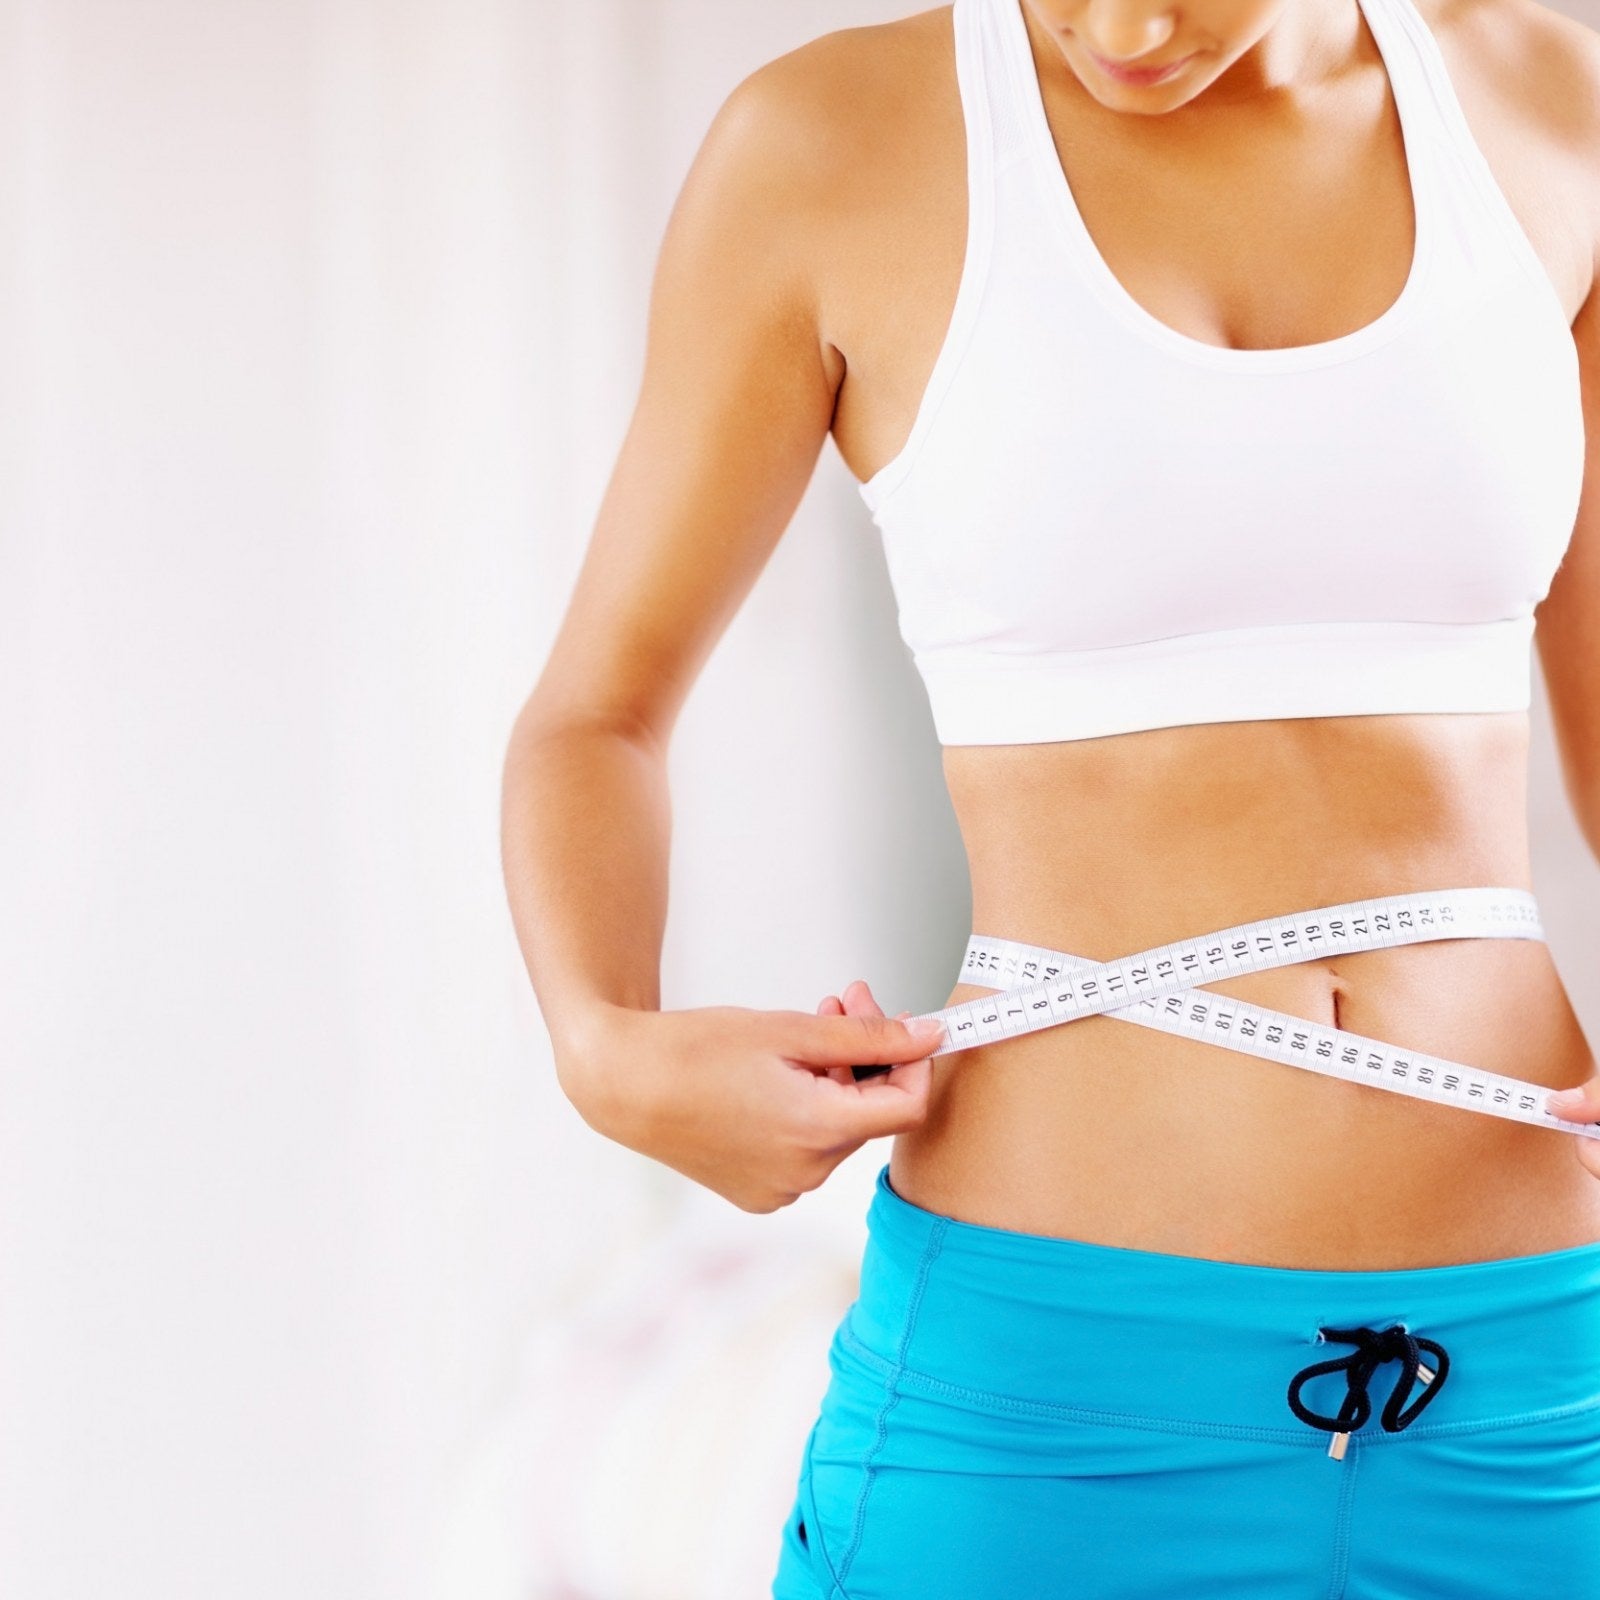 Ready to Transform Your Body? Try these Rapid Weight Loss Exercises!